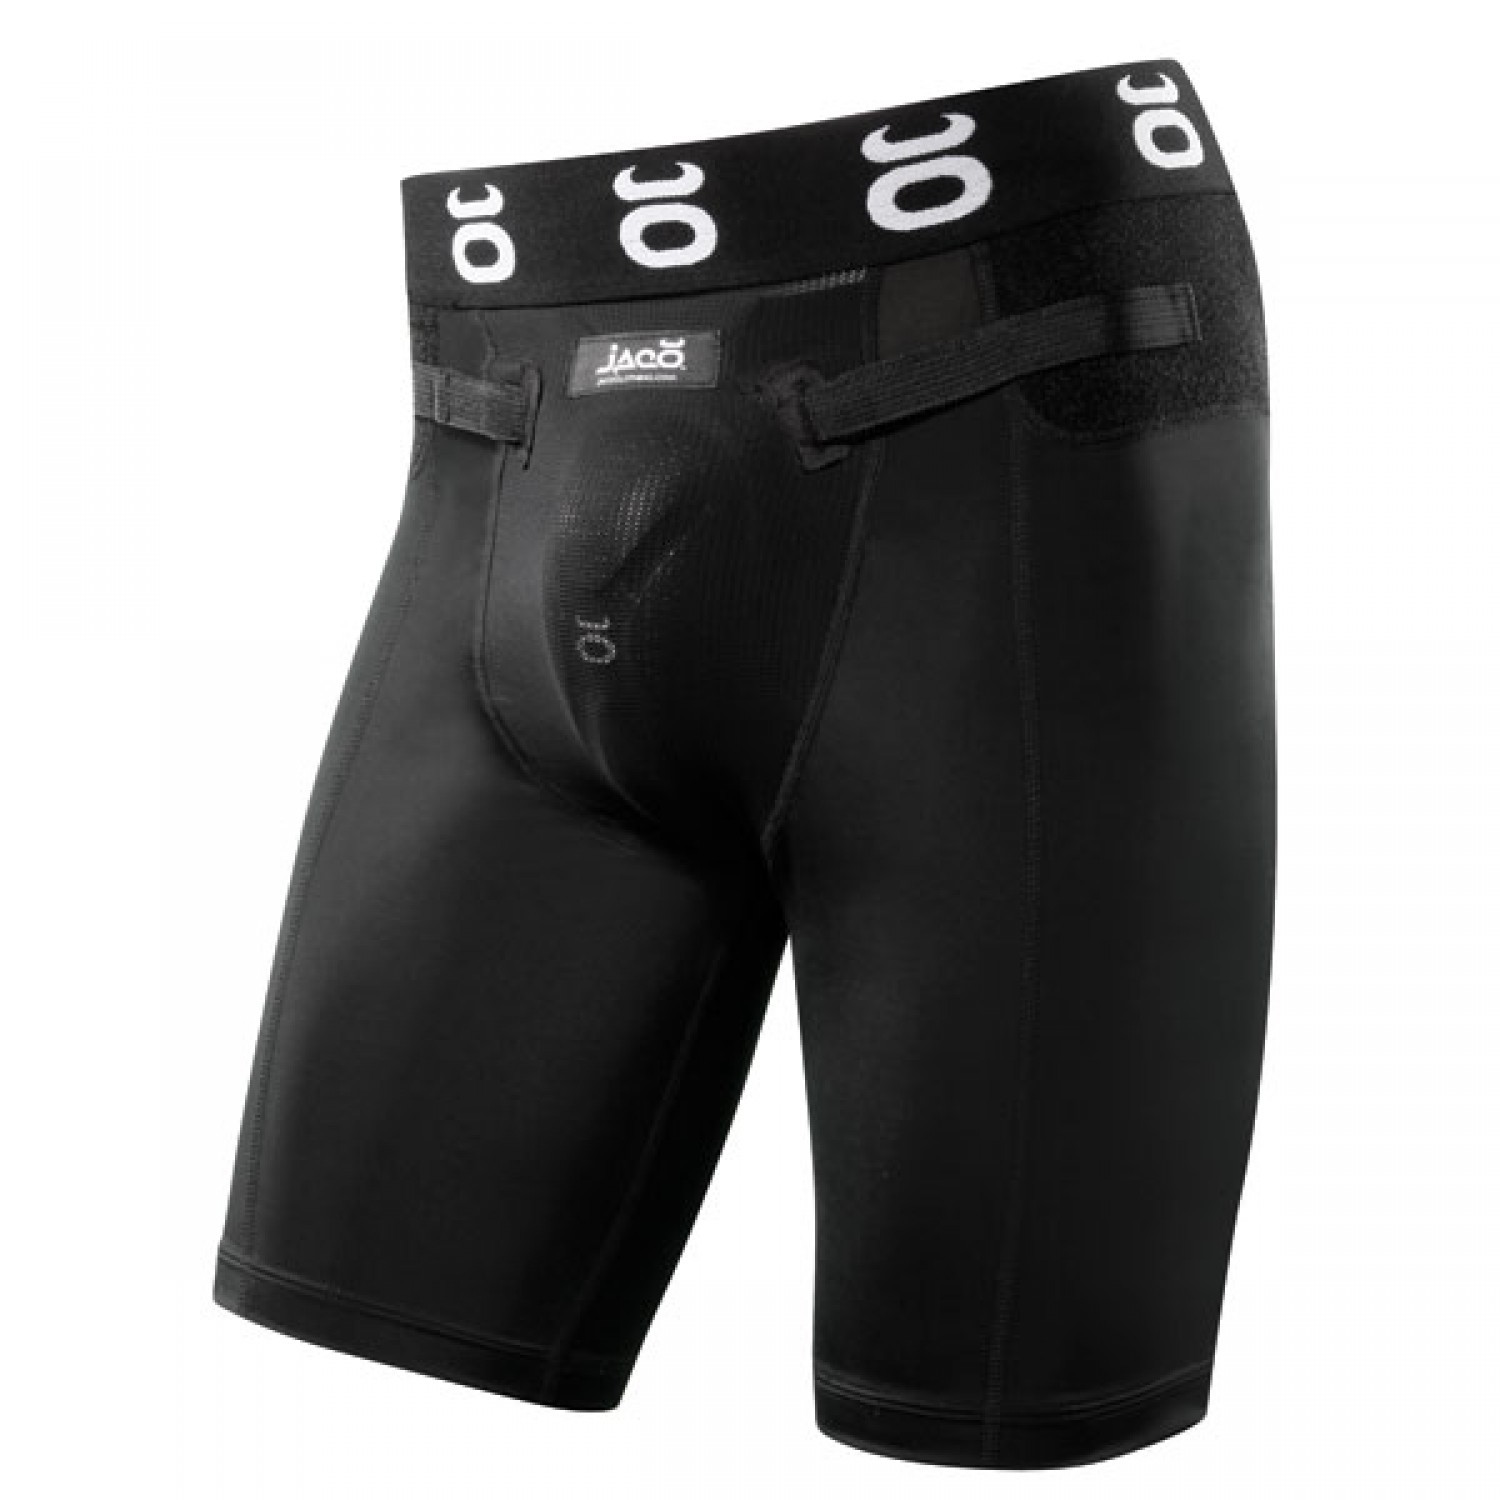 Youth Compression Jock & Athletic Cup System